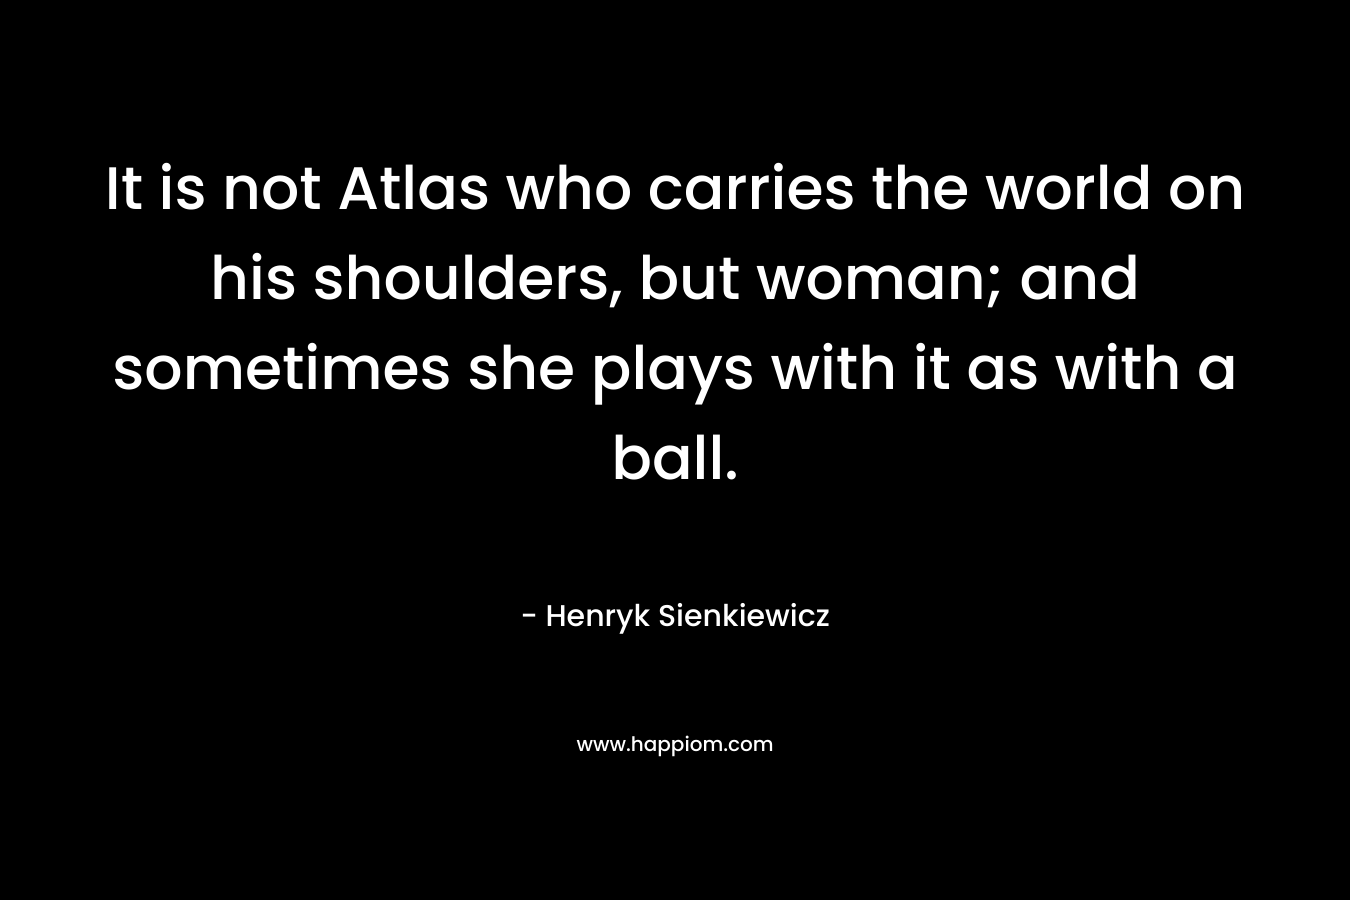 It is not Atlas who carries the world on his shoulders, but woman; and sometimes she plays with it as with a ball. – Henryk Sienkiewicz